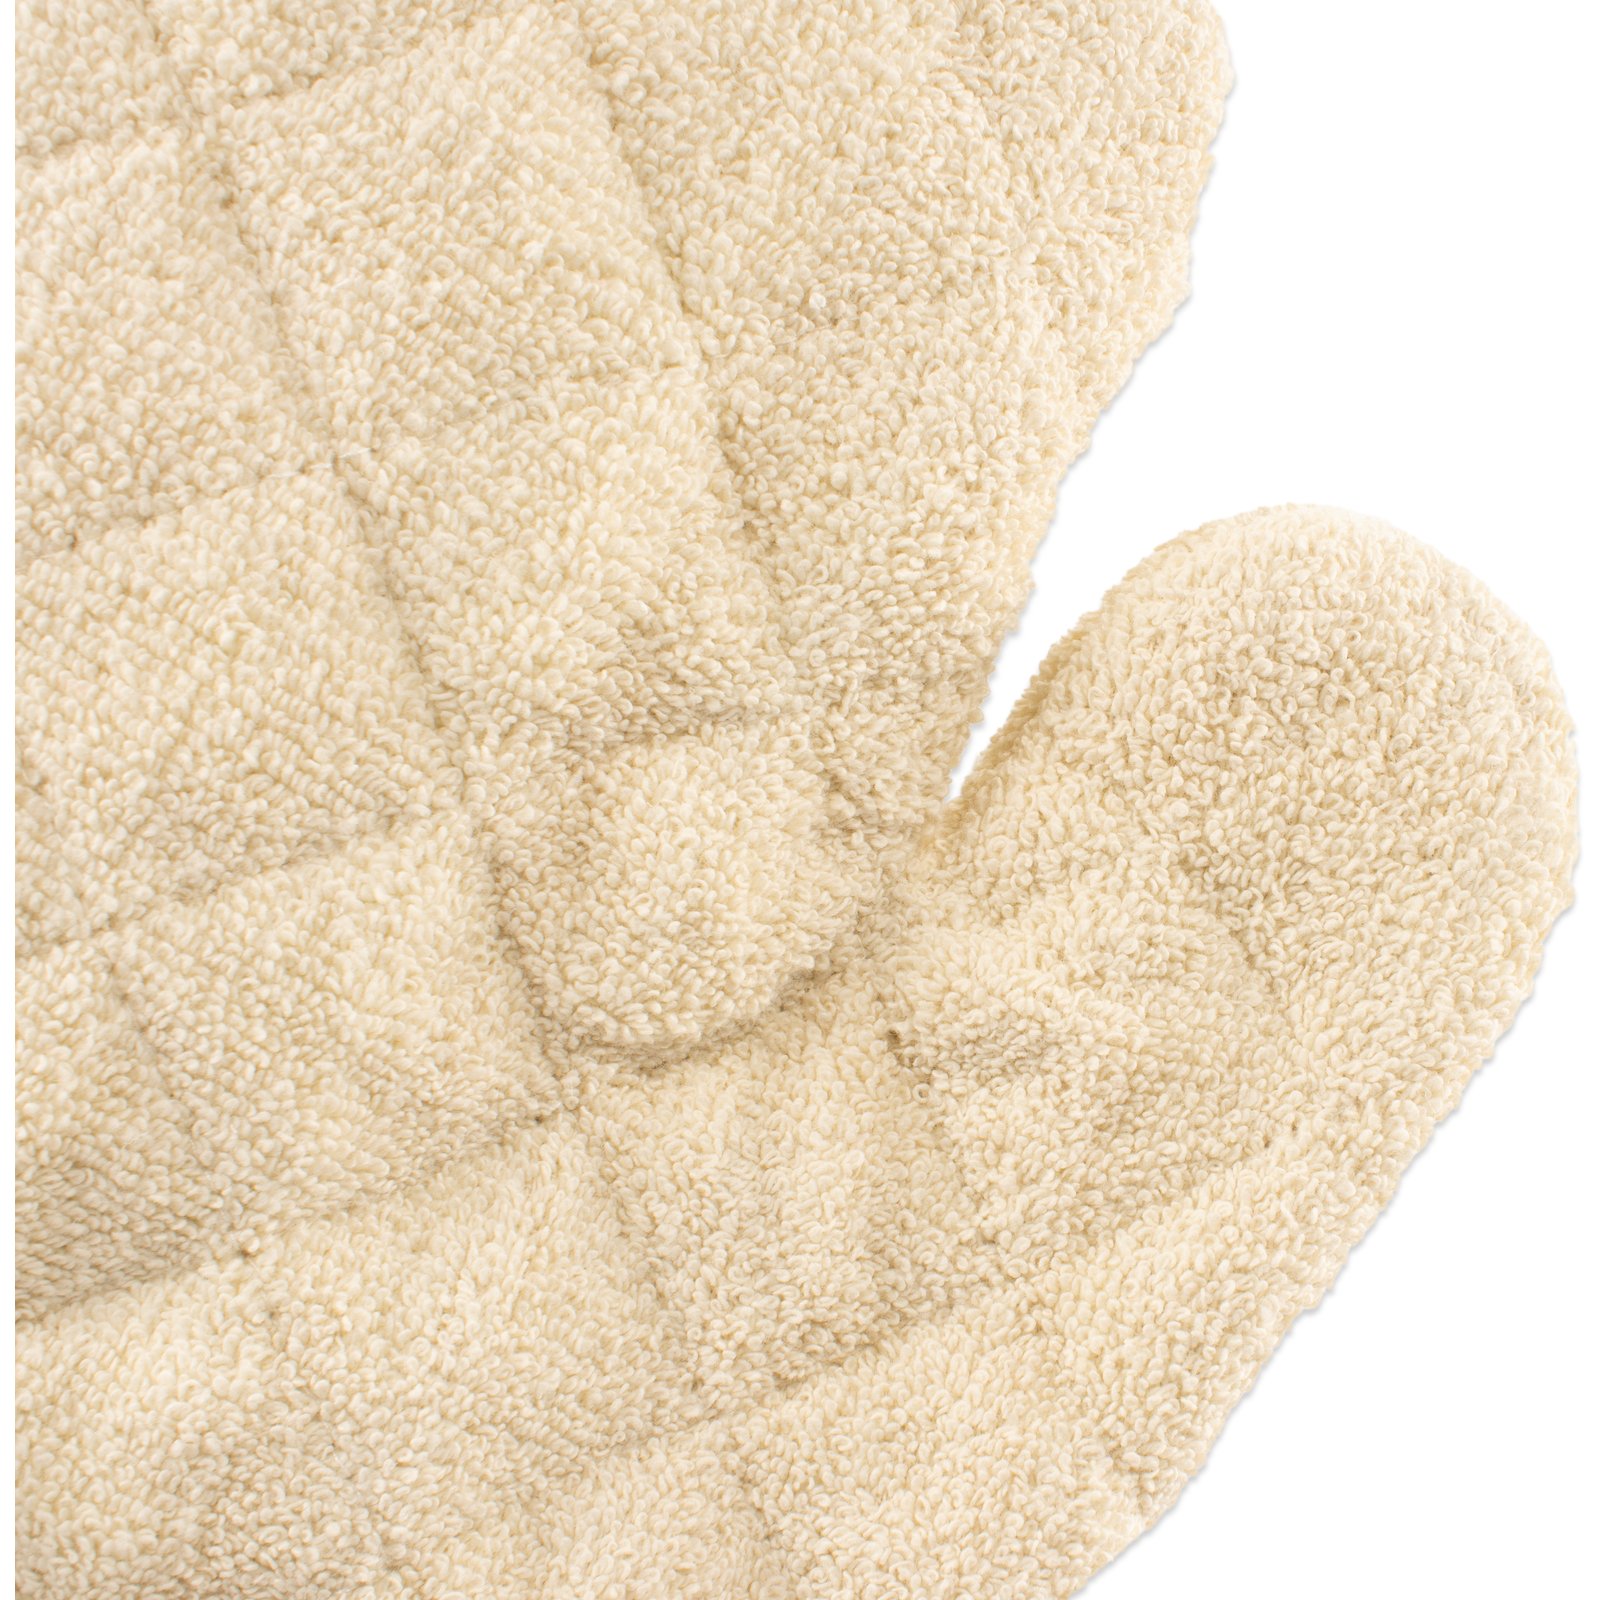 Pampered Chef Kathleen - Were you a fan of our double terry cloth oven mitts????  THEY ARE AT THE ONLINE OUTLET FOR ONLY $9!!! That's 1/2 price! Sign in at  www.pamperedchef.biz/kathleenblack Click